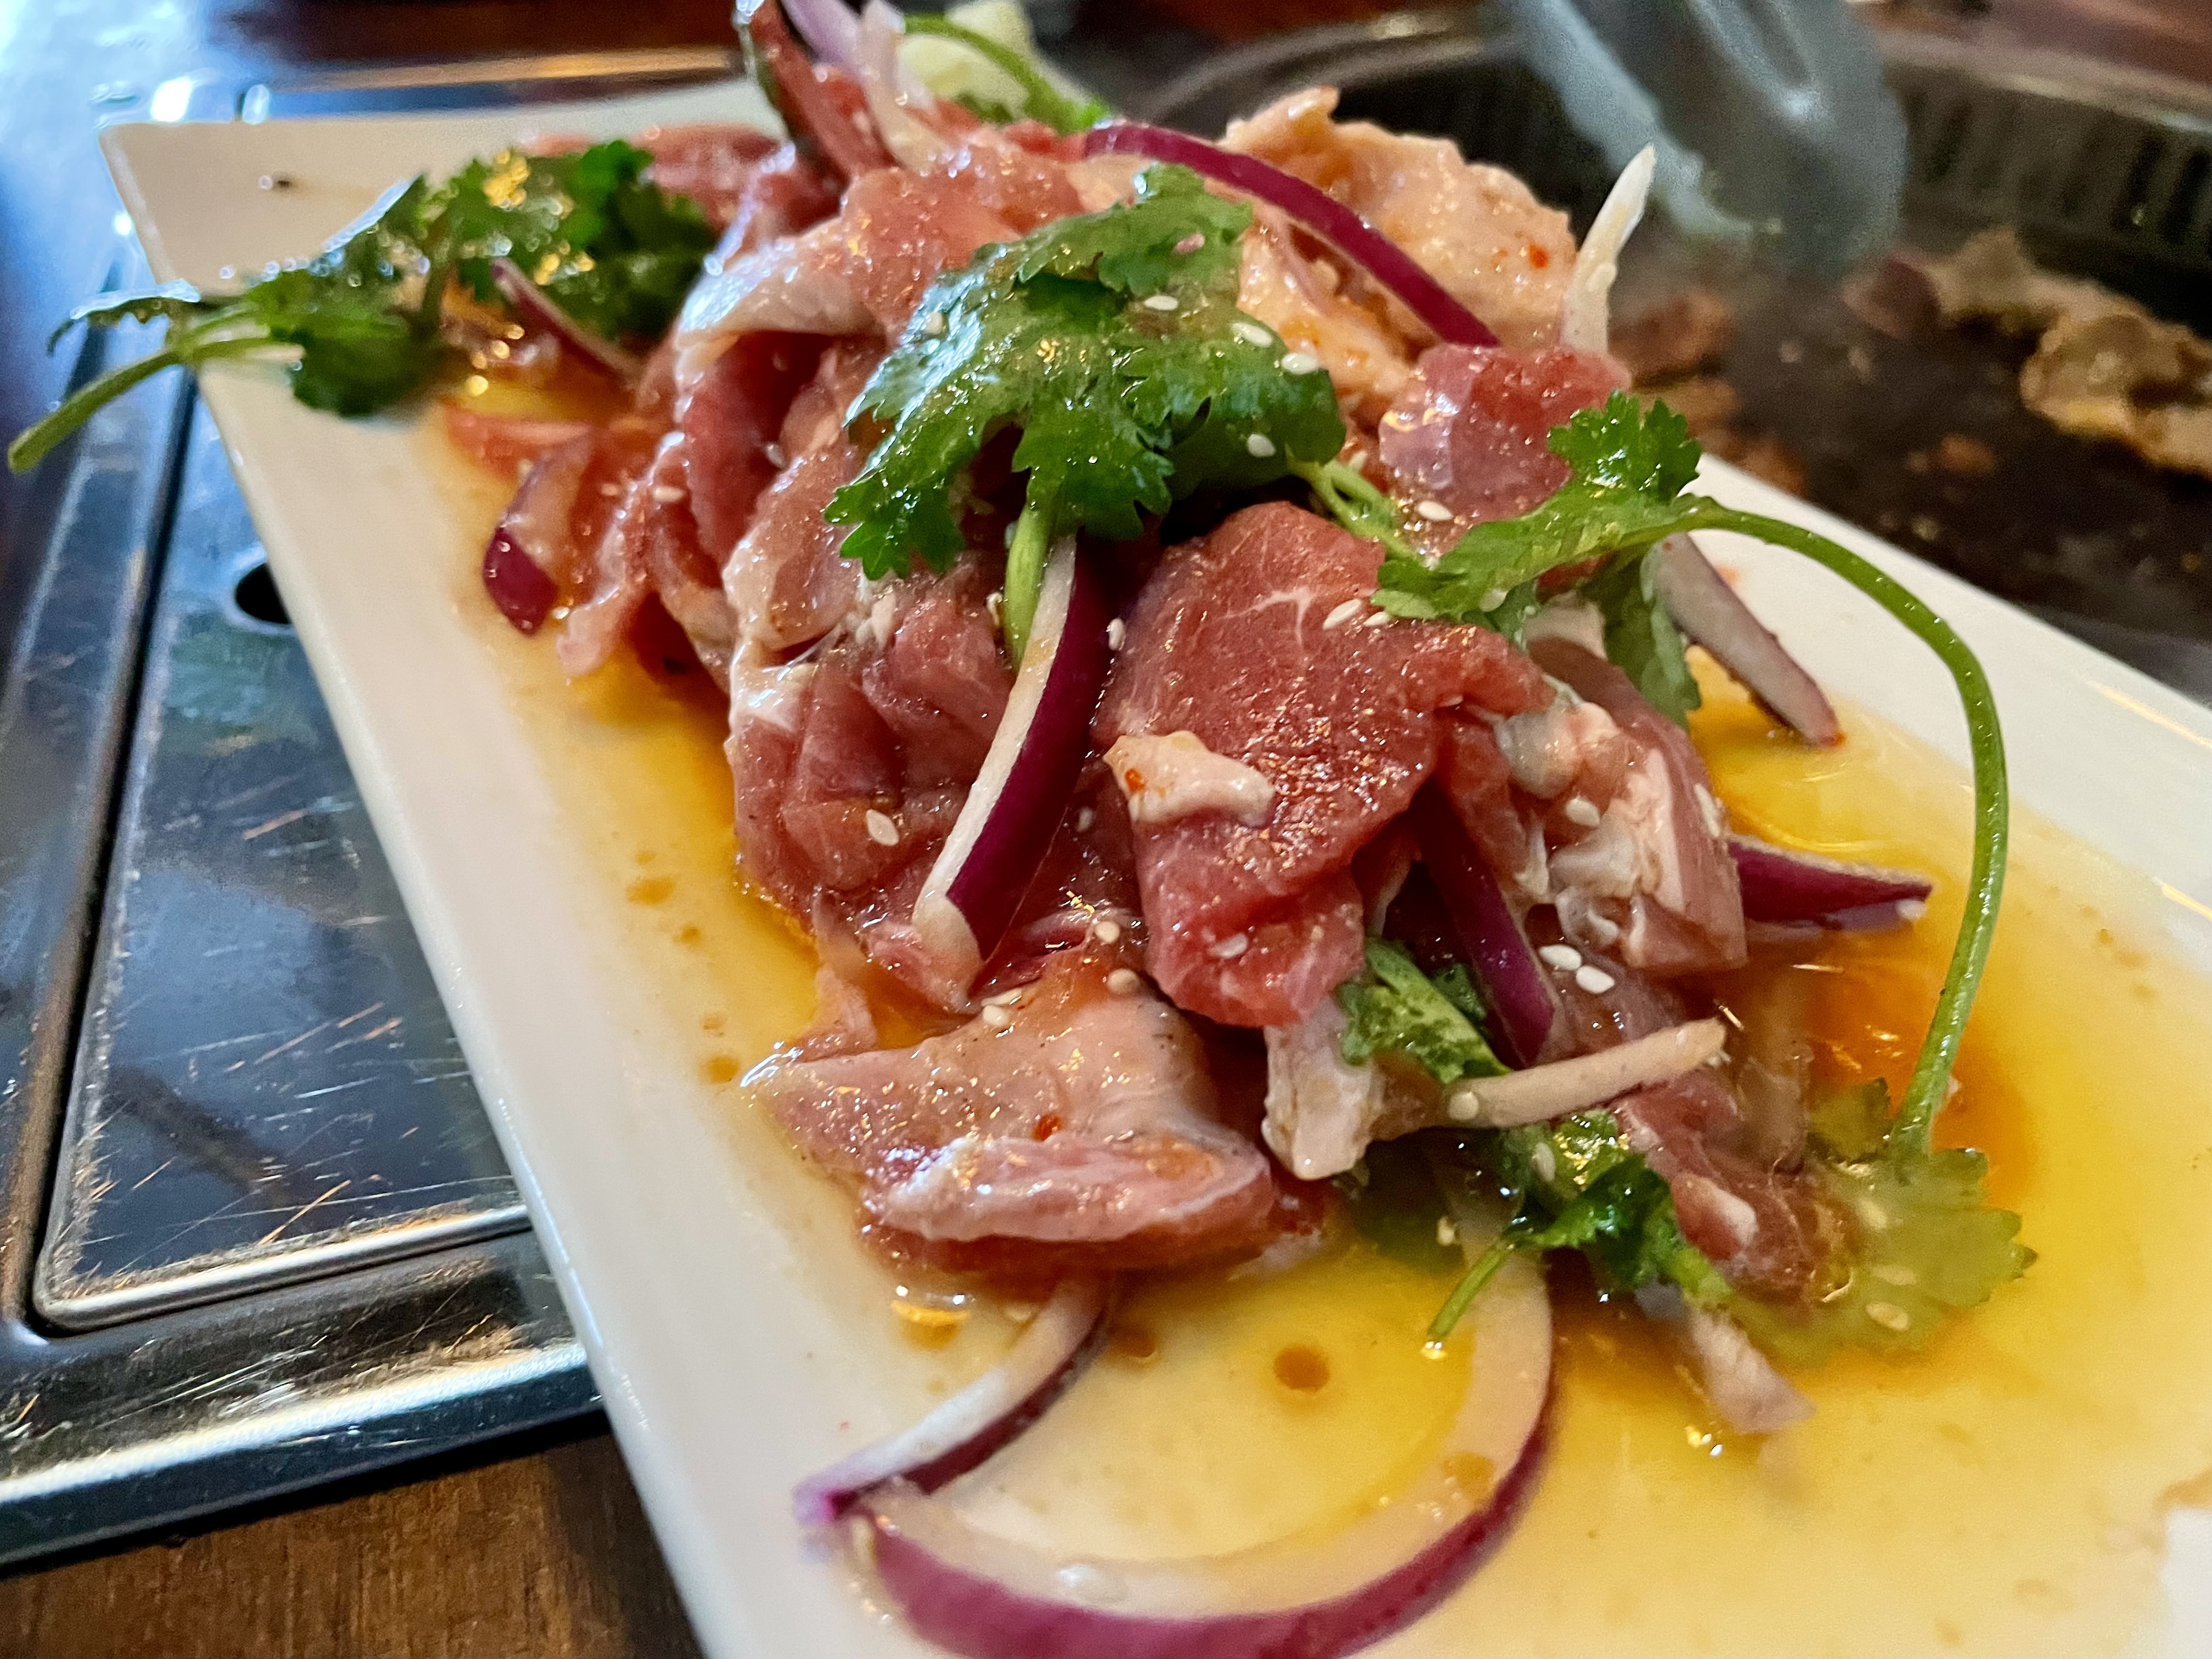 Thin strips of lamb were pre-marinated and served with onions, garlic, cilantro and peppers to barbecue at the table itself 